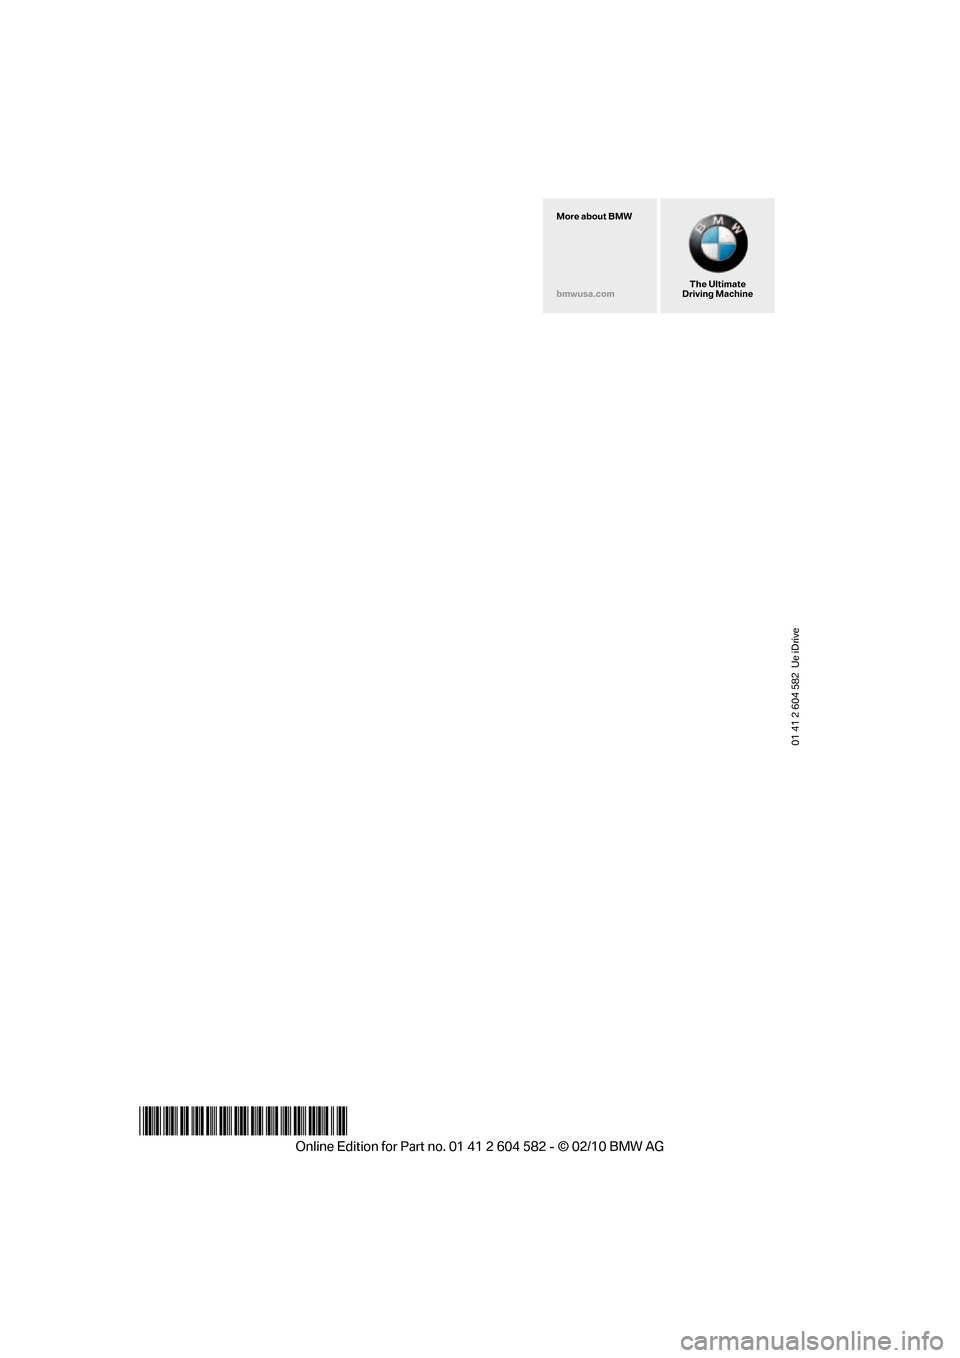 BMW 335D 2011 E90 Owners Manual 01 41 2 604 582  Ue iDrive
*BL260458200R*
The Ultimate
Driving Machine More about BMW
bmwusa.com 